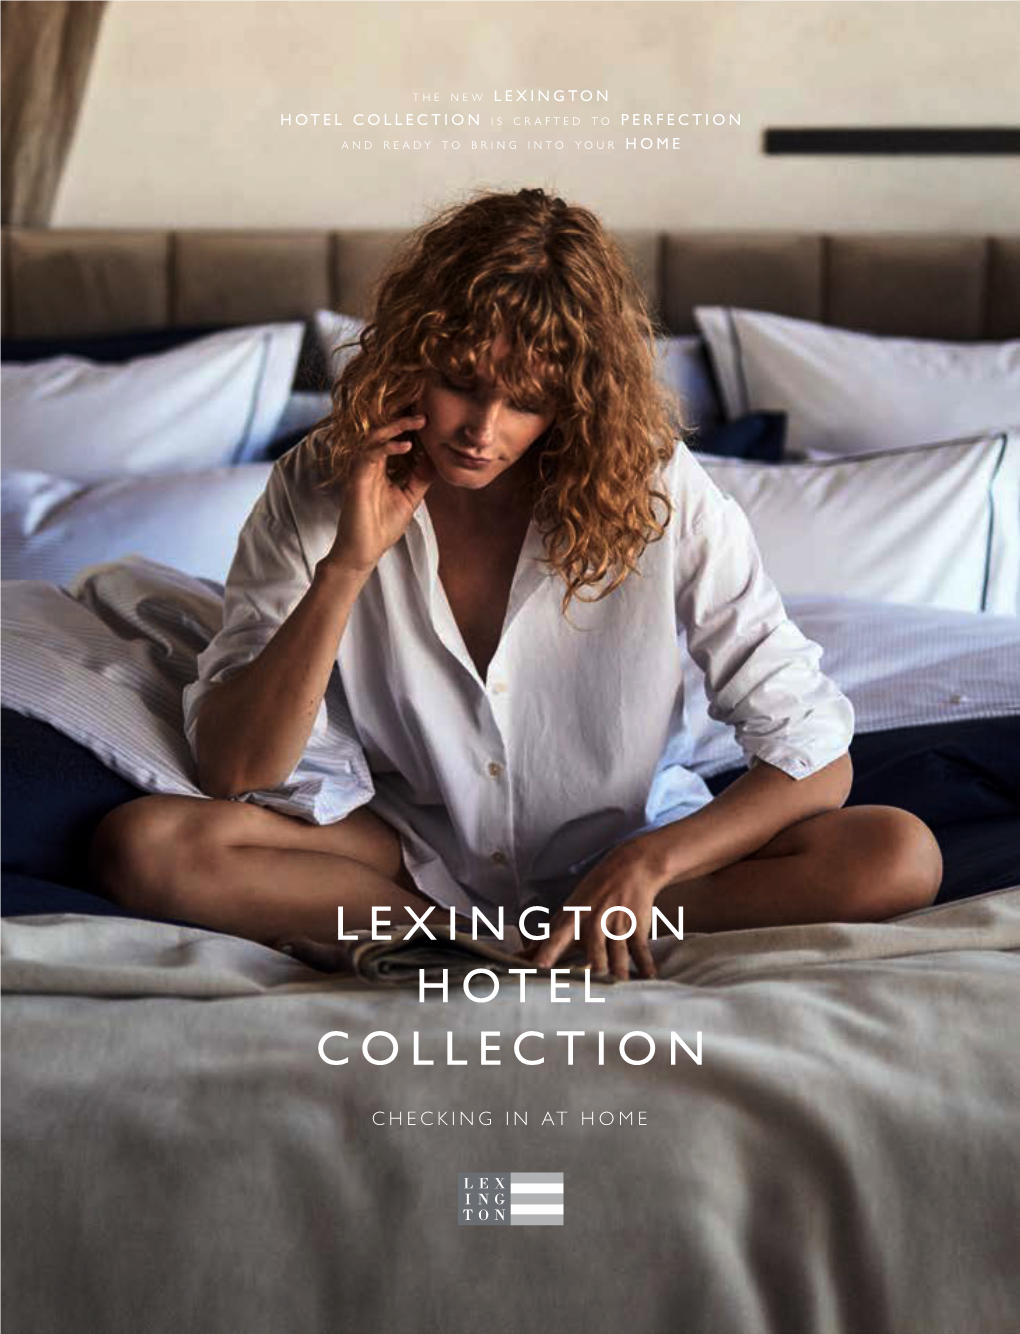 LEXINGTON HOTEL COLLECTION Is Crafted to PERFECTION and Ready to Bring Into Your HOME